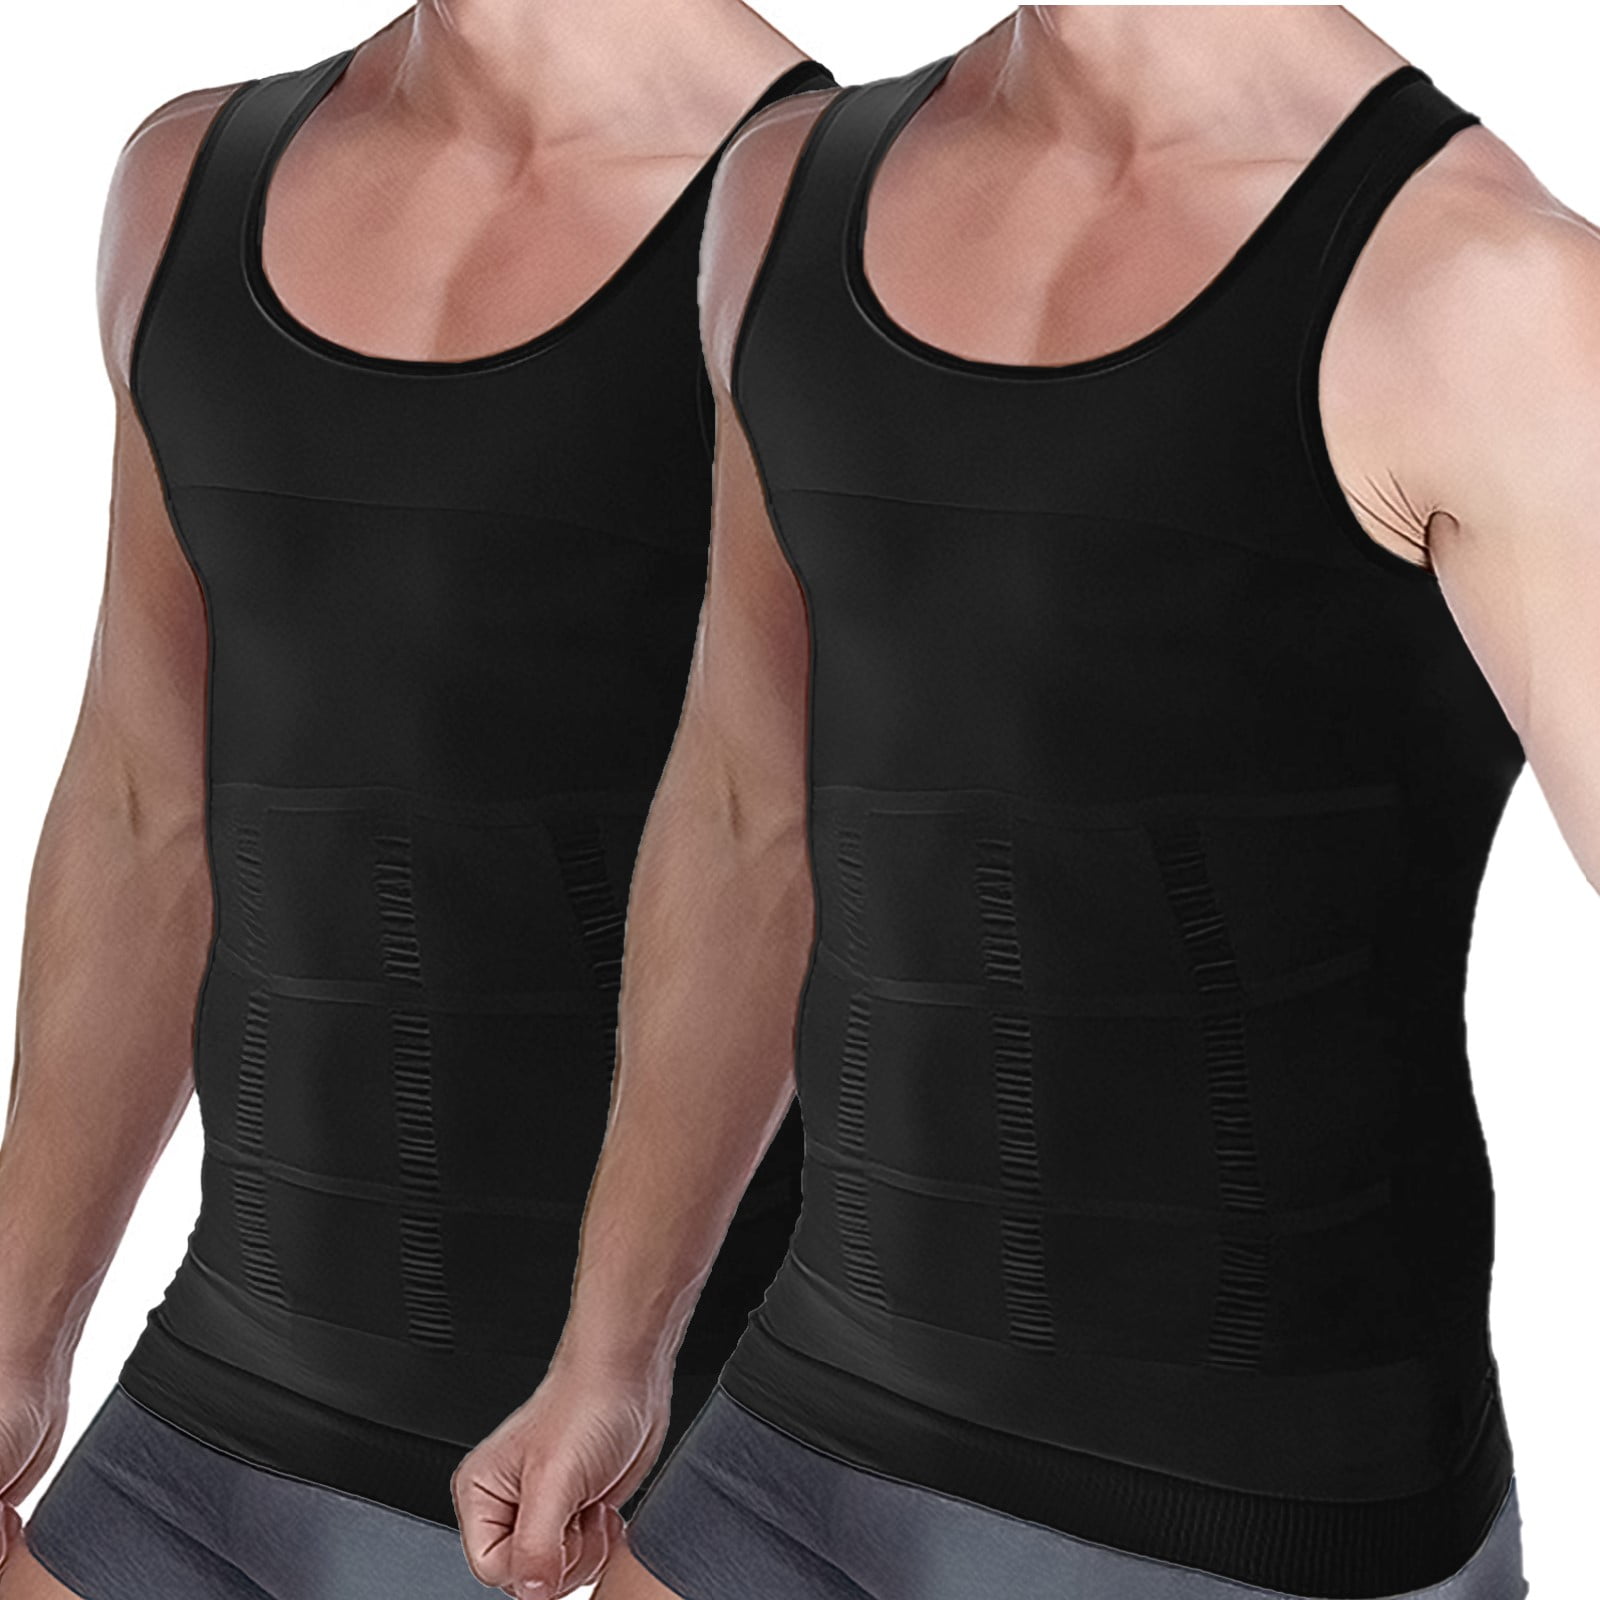 Aptoco 2 Pcs Compression Shirts for Men Gynecomastia Tank Tops Body Shaper  Vest for Workout Male Slimming Base Layer Belly Control Undershirt, Size S,  Valentines Day Gifts 